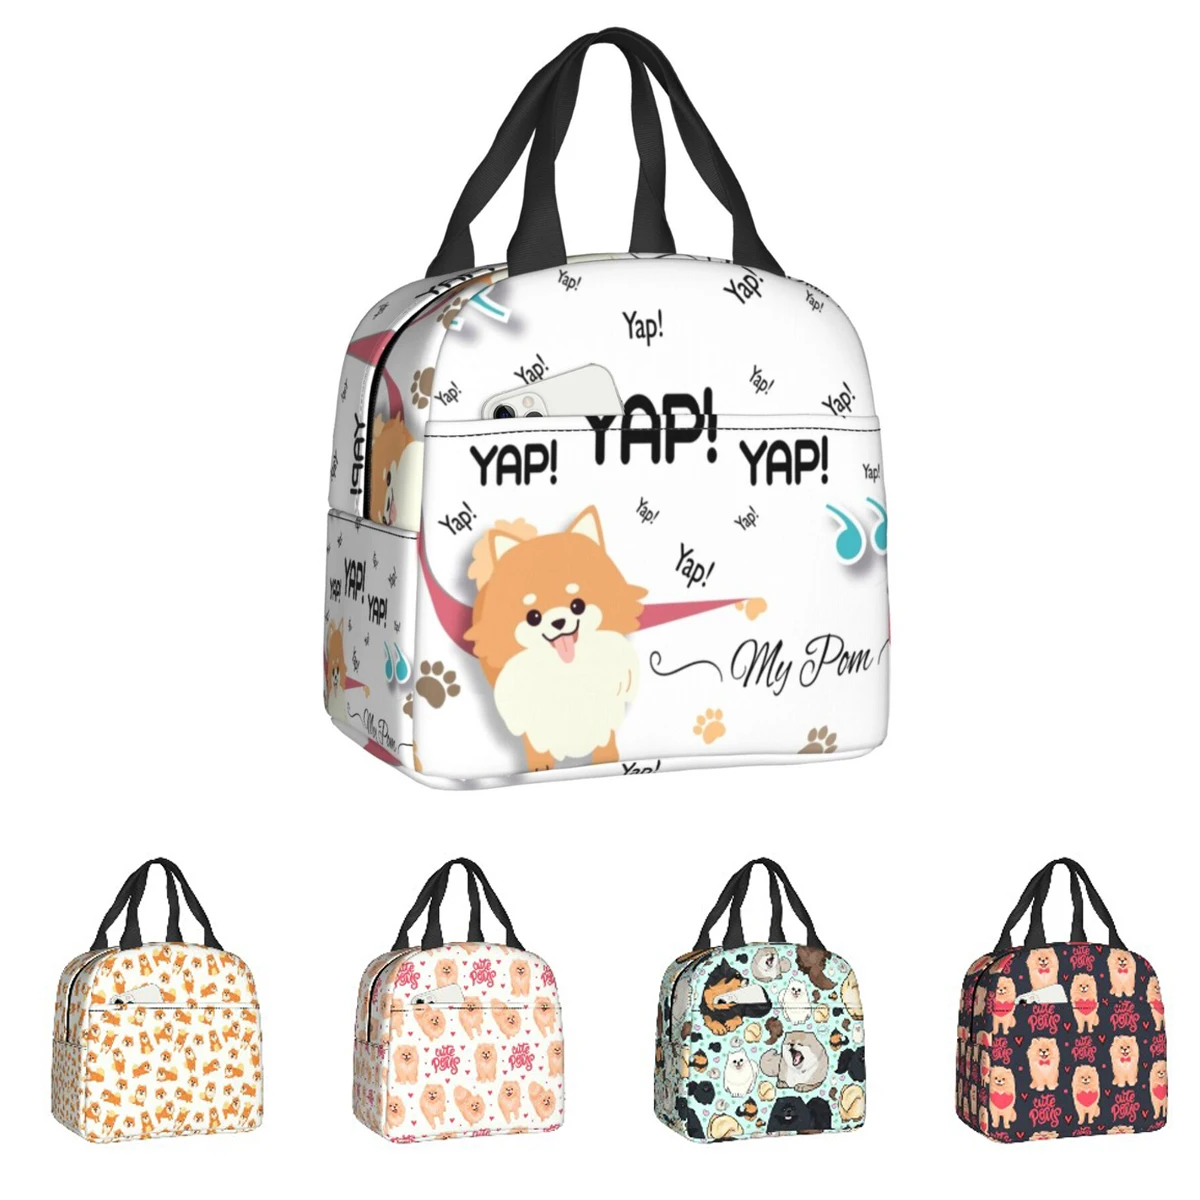 Cartoon Pomeranian Lunch Boxes Women Multifunction Spitz Dog Thermal Cooler Food Insulated Lunch Bag Office Work